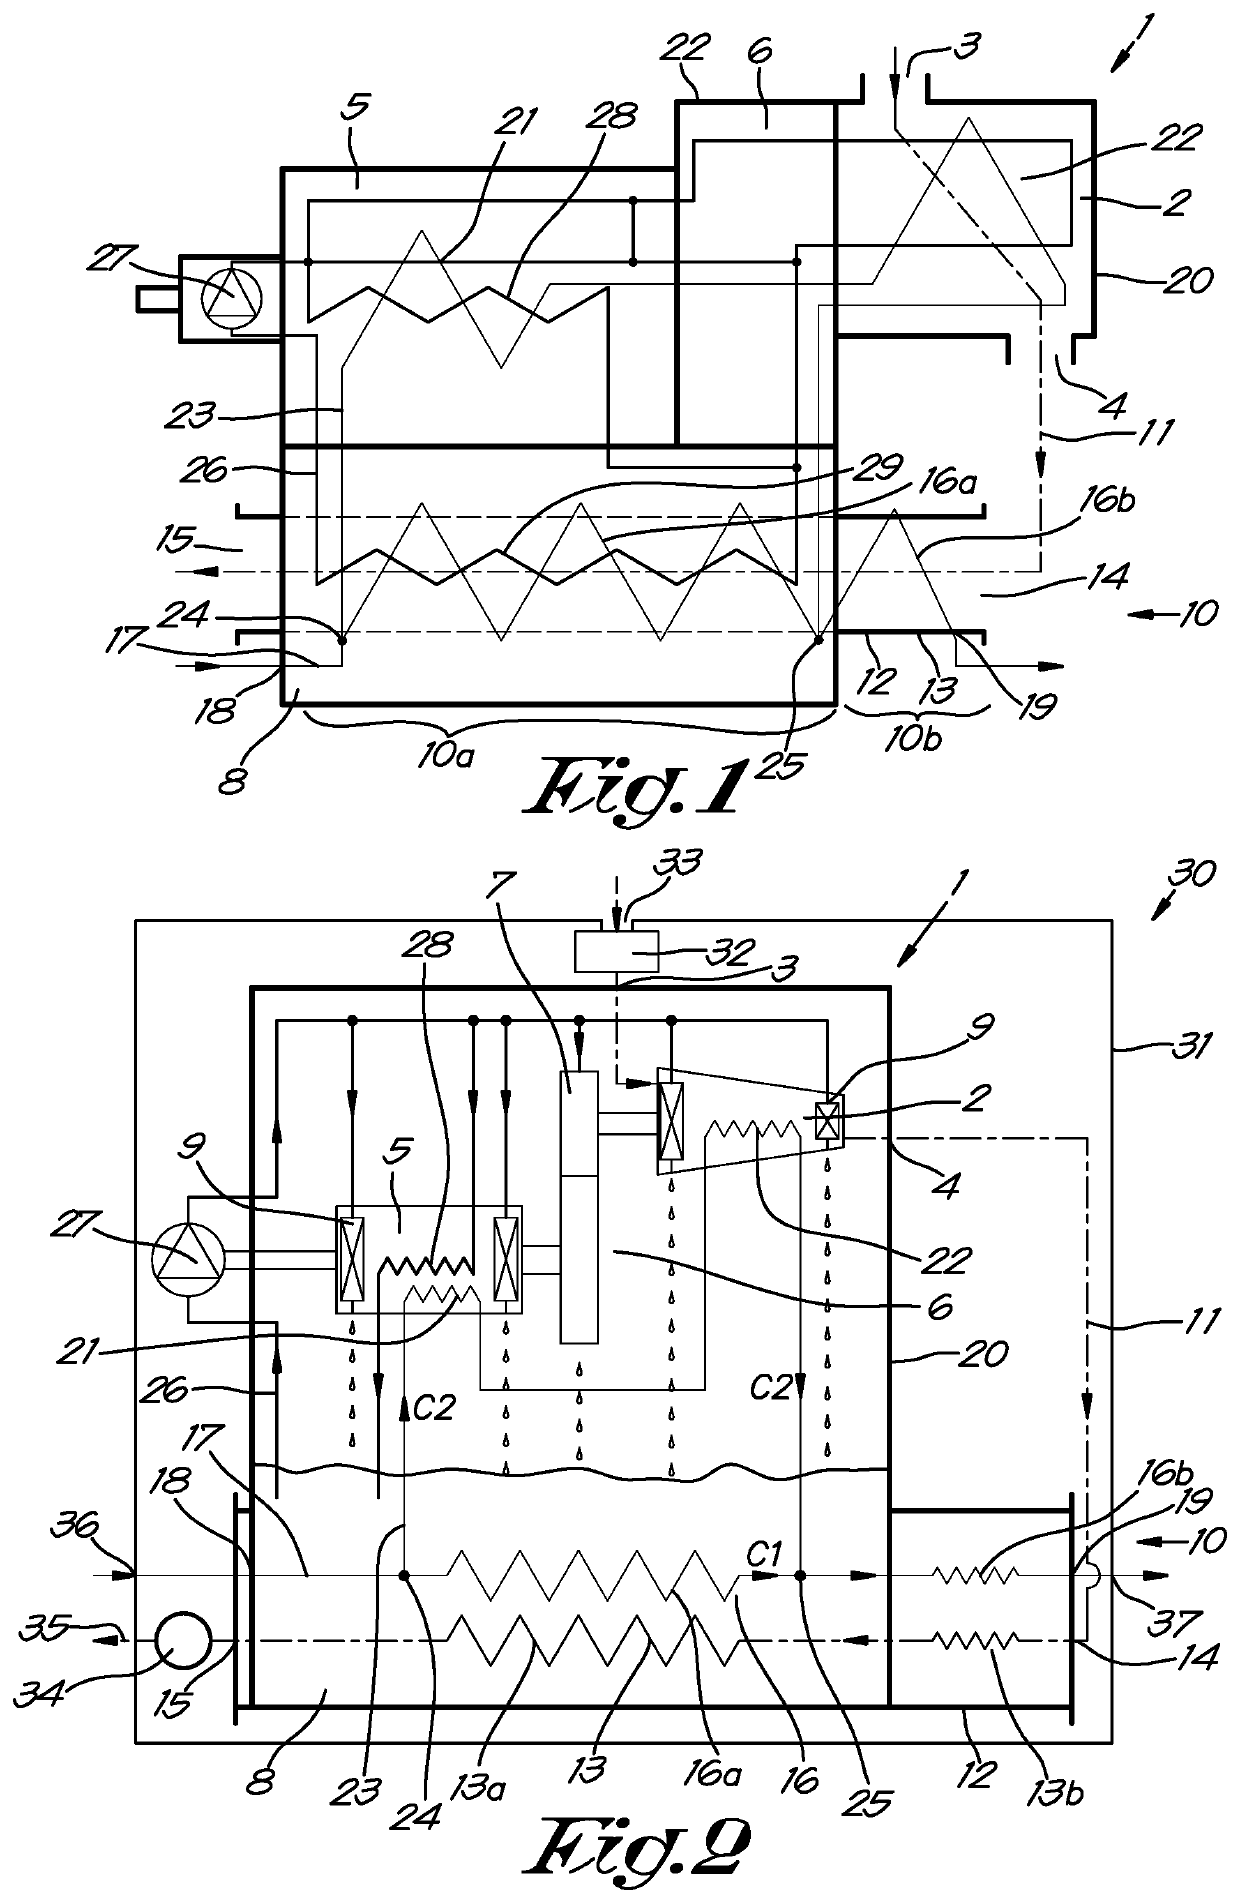 Compressor module for compressing gas and compressor equipped therewith